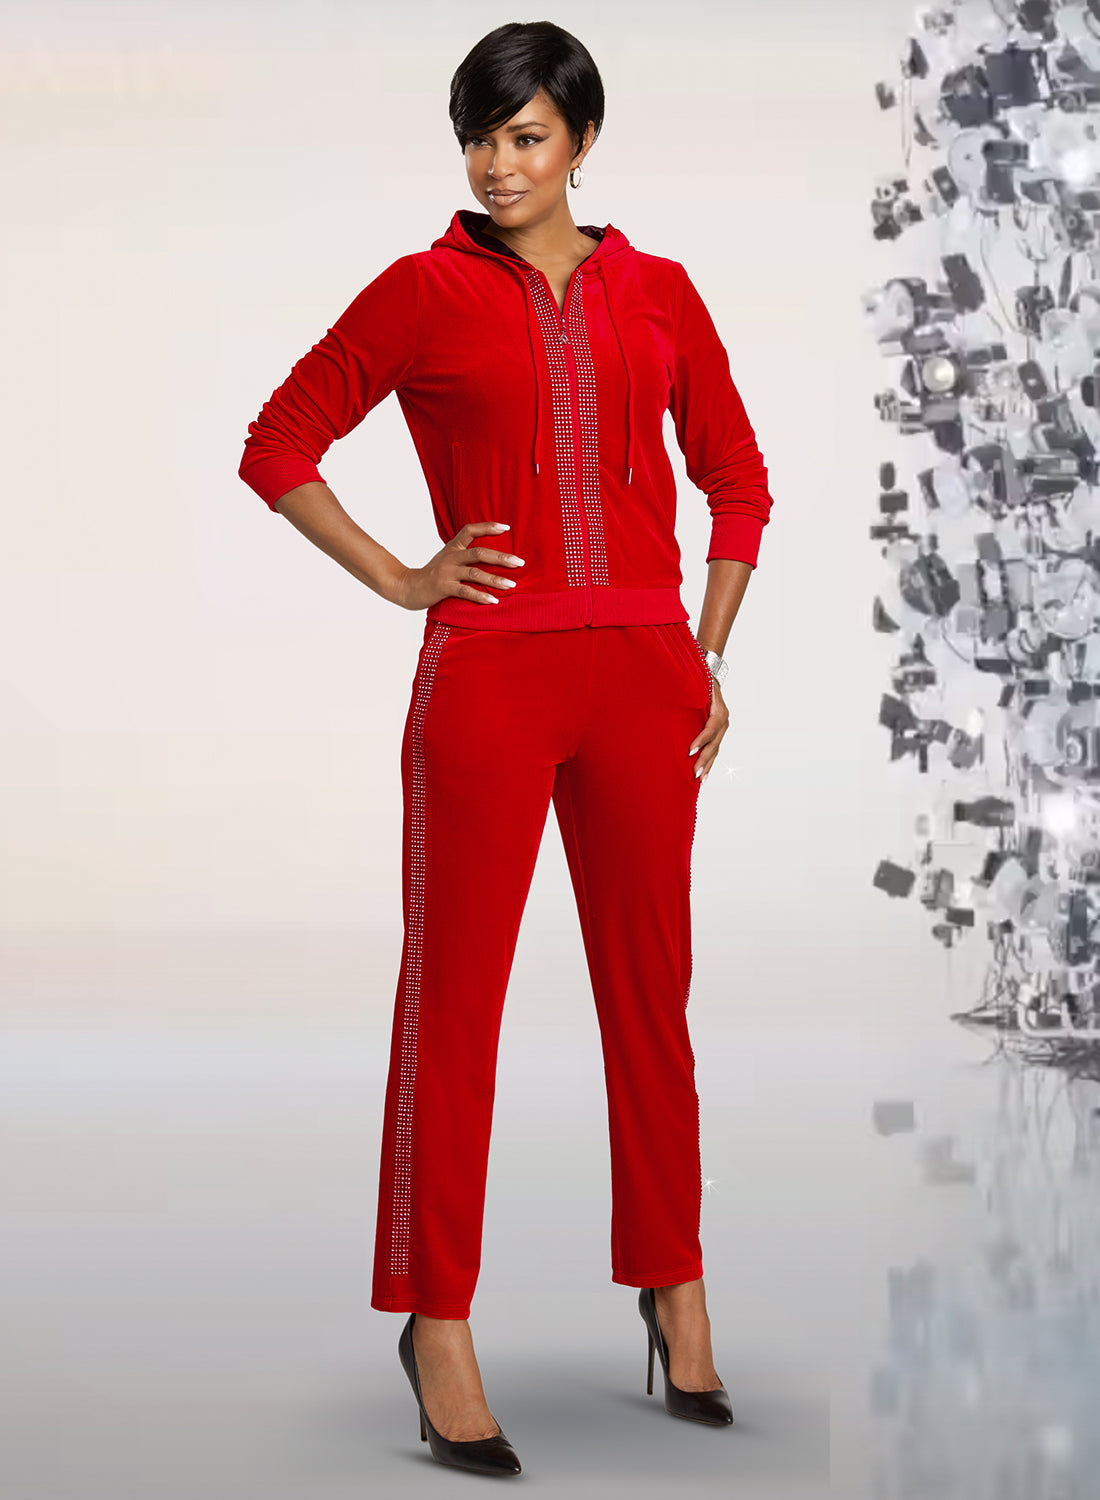 Donna Vinci Sport 21024 - Red High Quality Stretch Velour with Rhinestone Trim and Satin Lined Hoodie